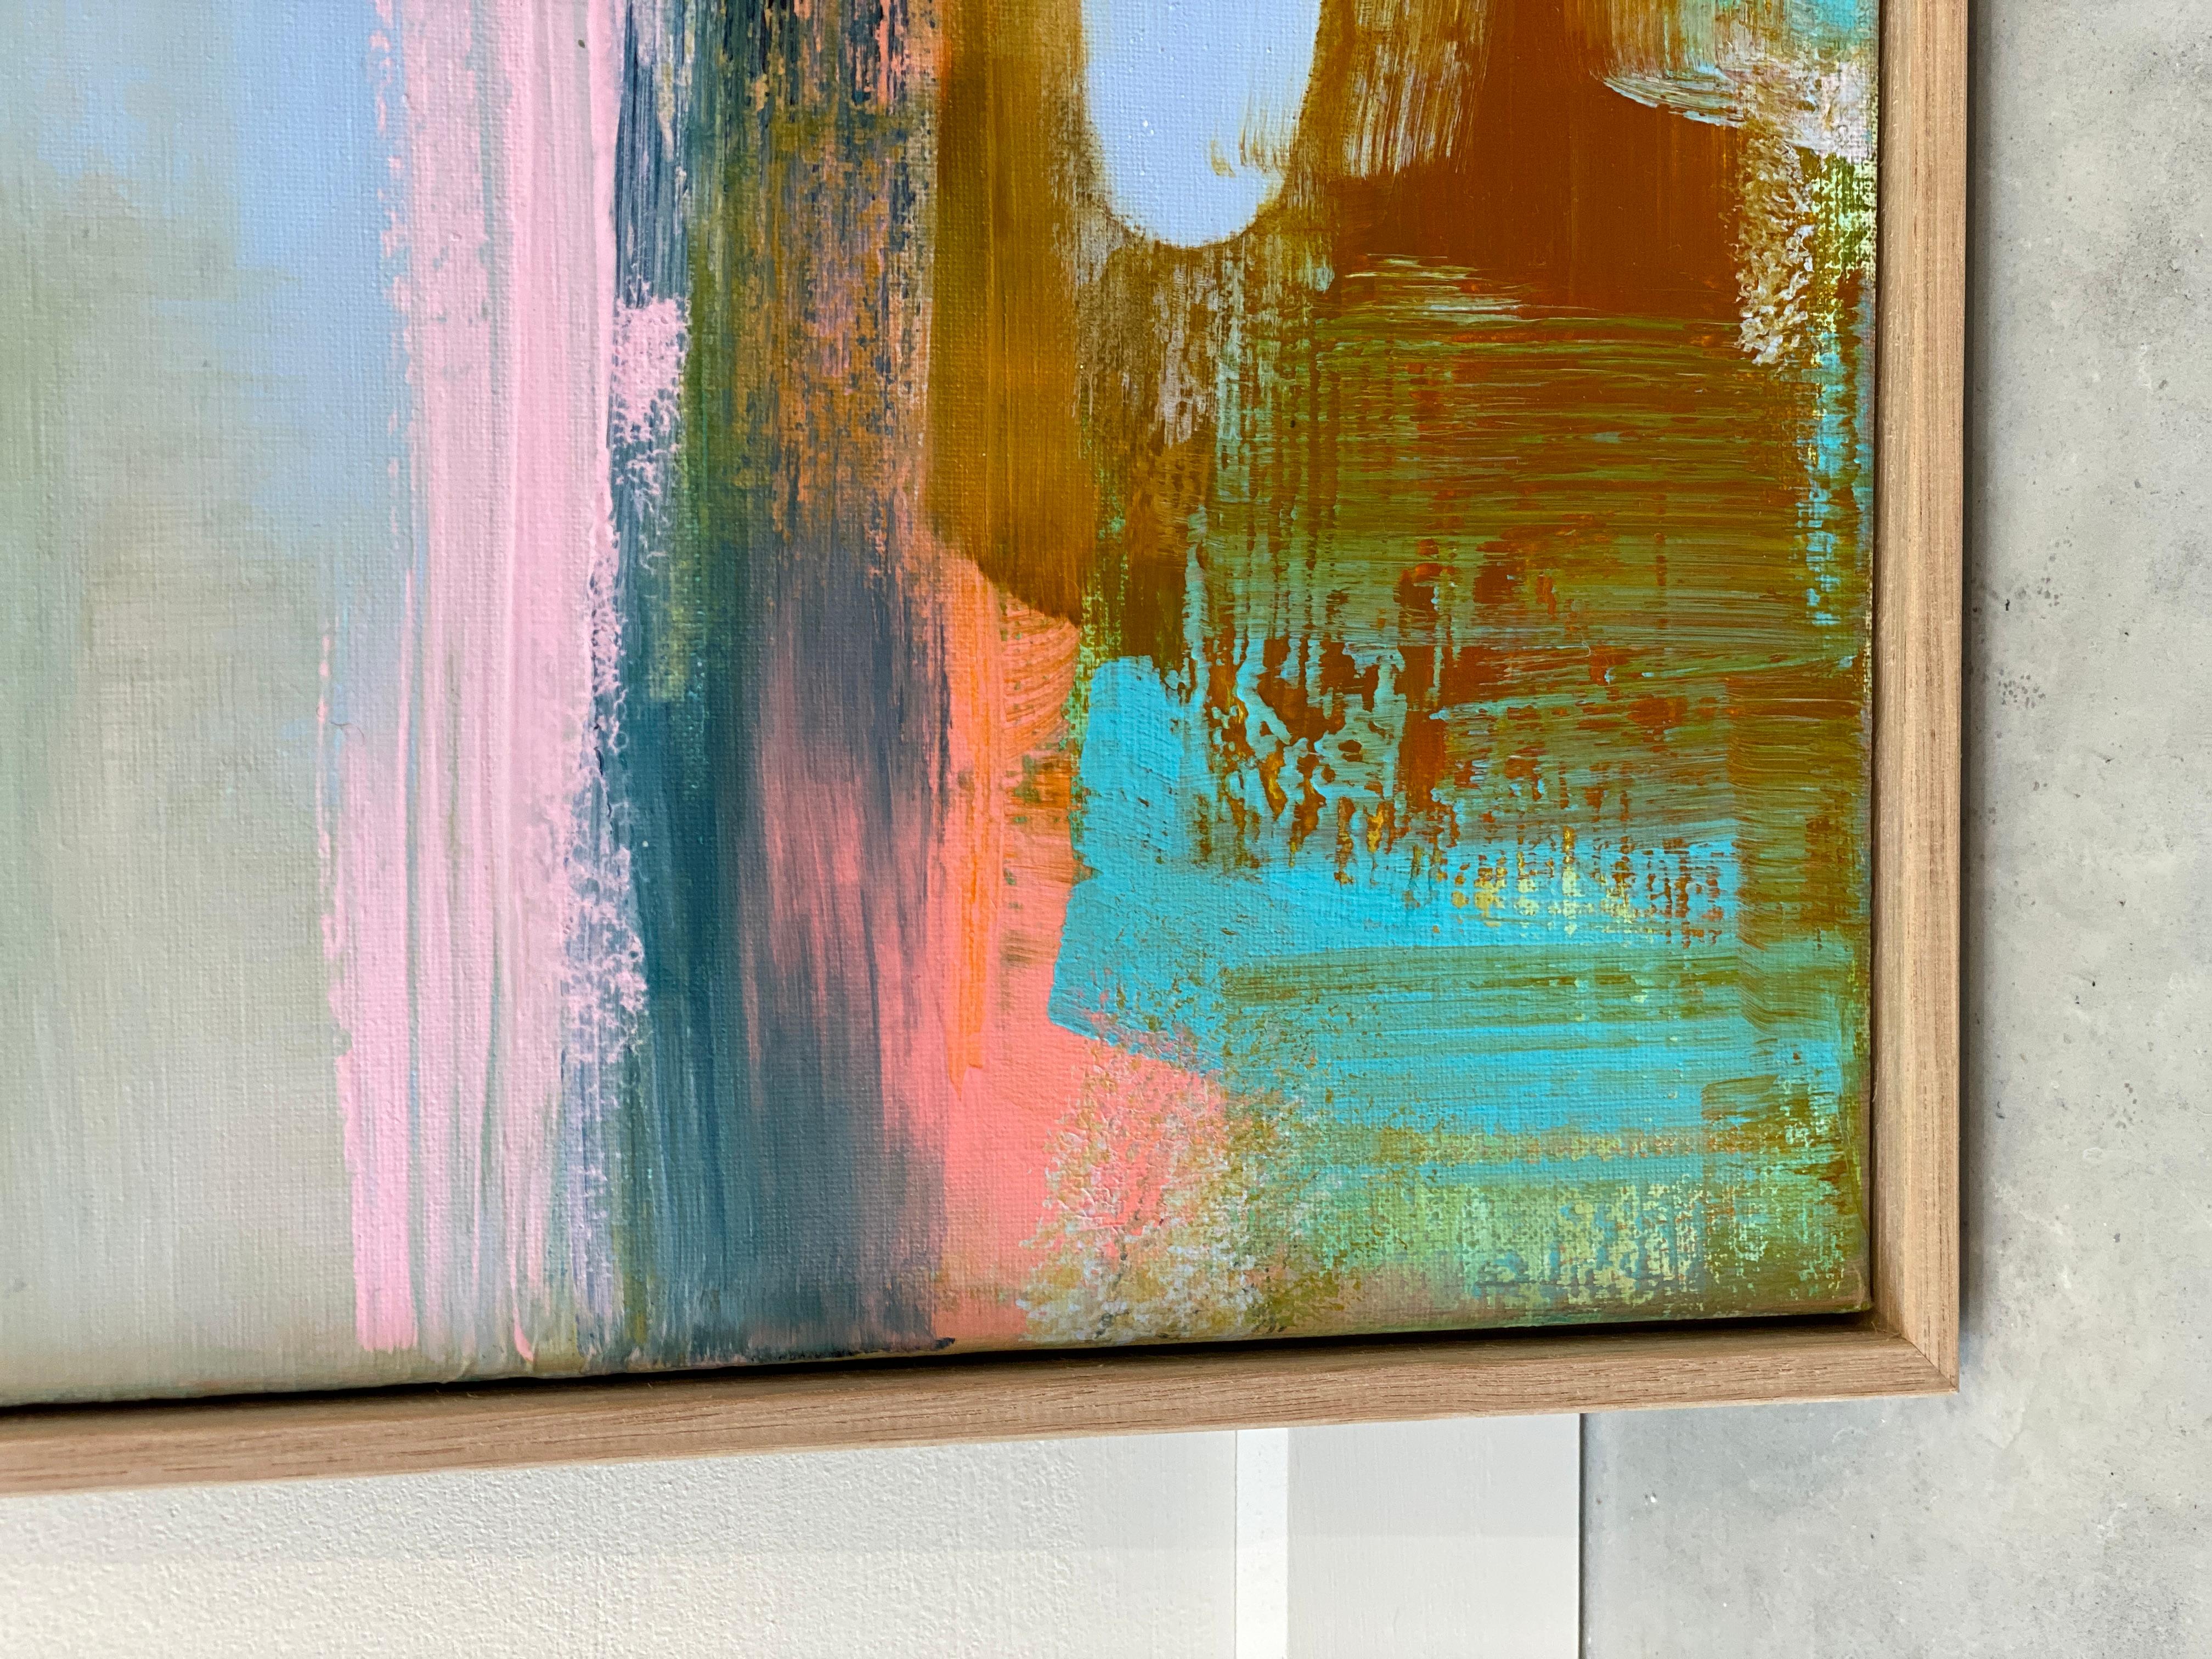 'It's Summer' a small square works collection of quality custom framed, minimalist abstract expressionist paintings on canvas. Lighten up the room with bright, summer colours of pastels, deep shades of ocean blues and aqua's. Enjoy the energy and